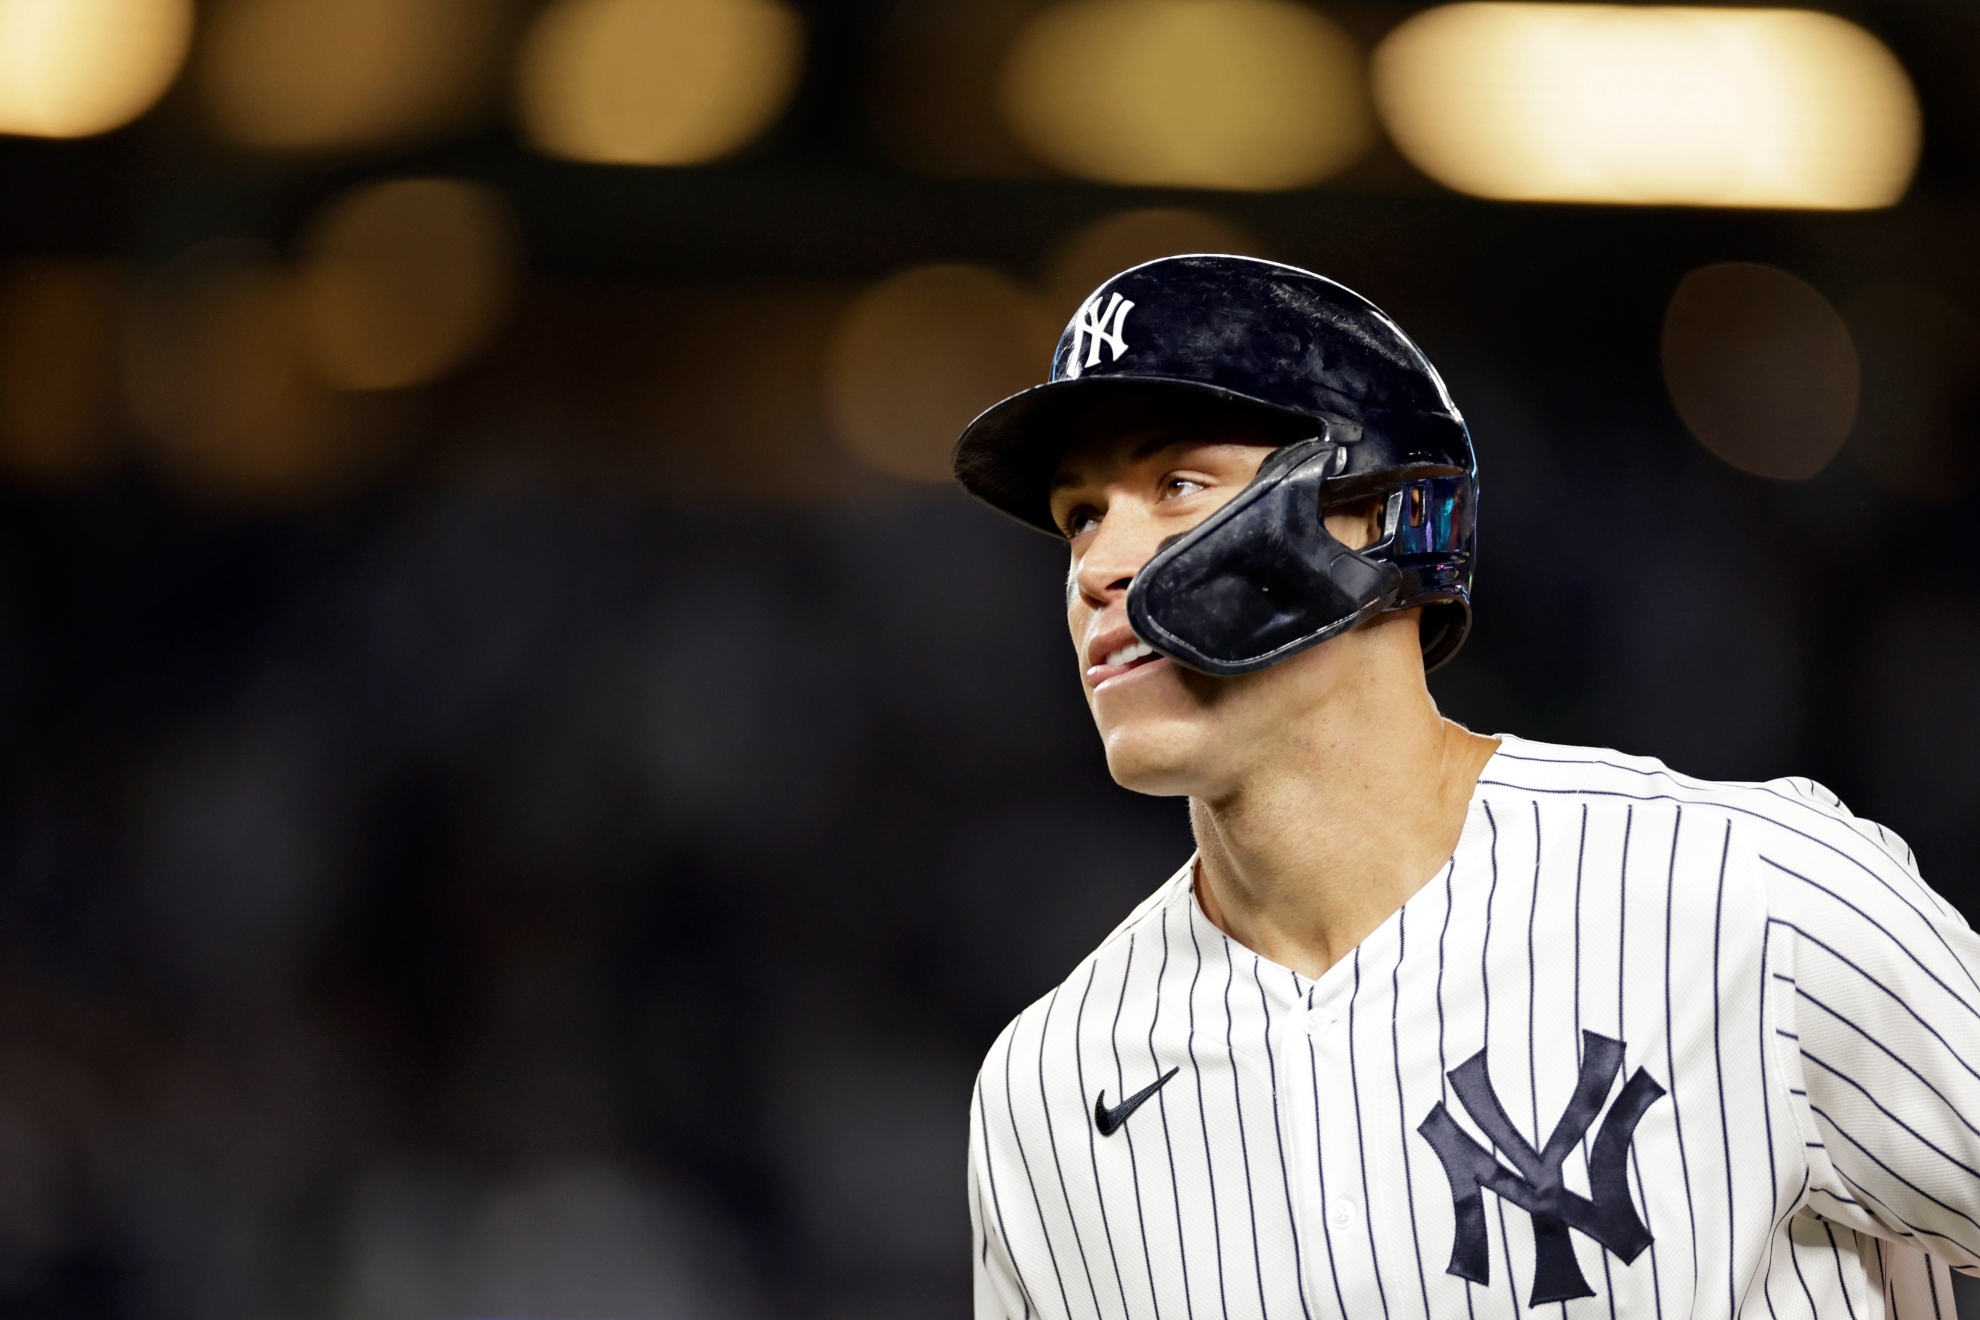 Aaron Judge still chasing home run No. 61, here's what fan who